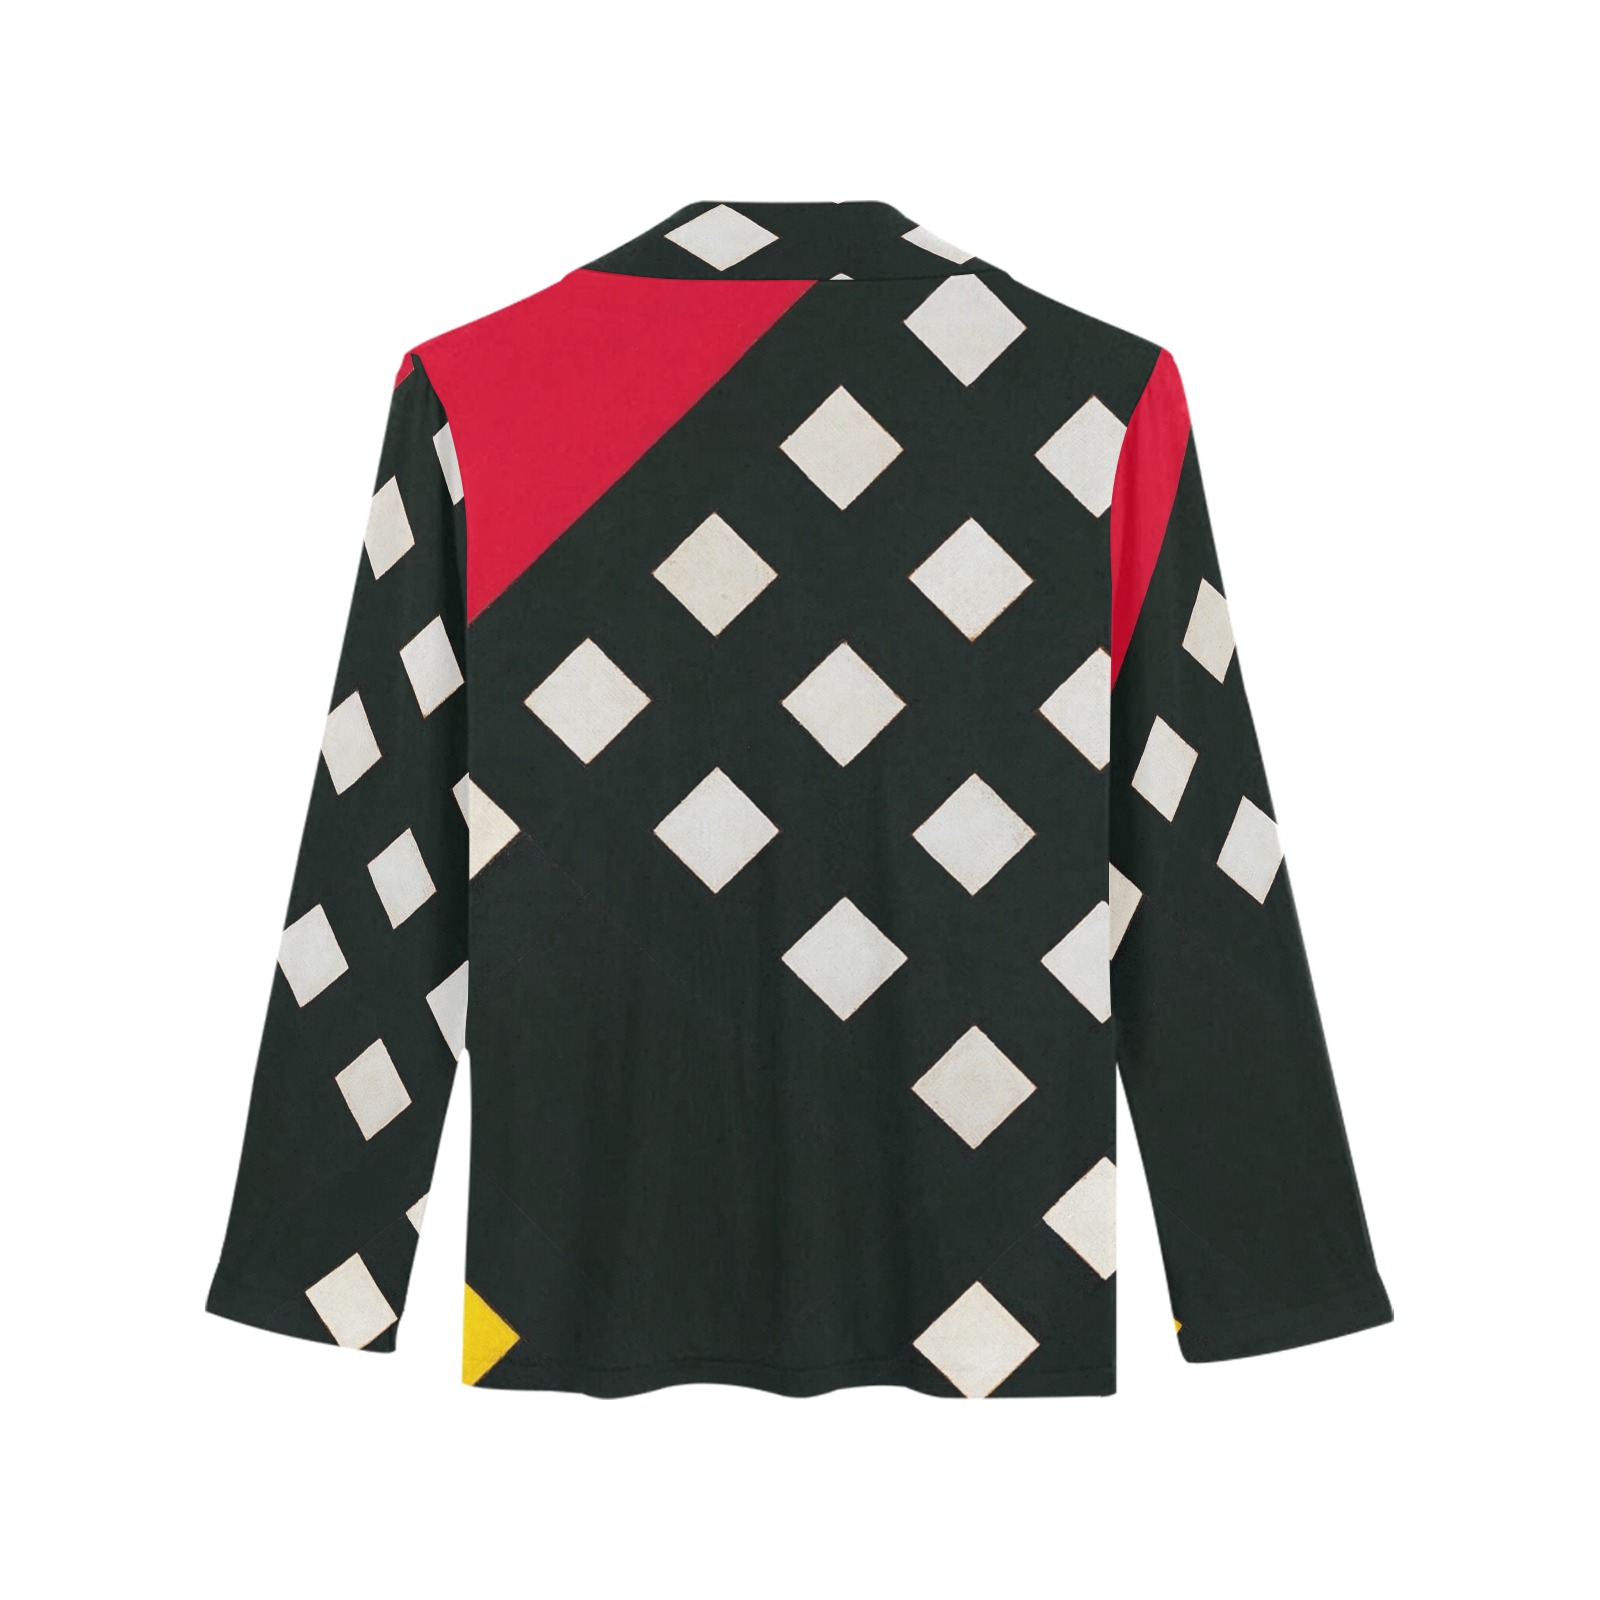 Counter-composition XV by Theo van Doesburg- Women's Long Sleeve Pajama Shirt